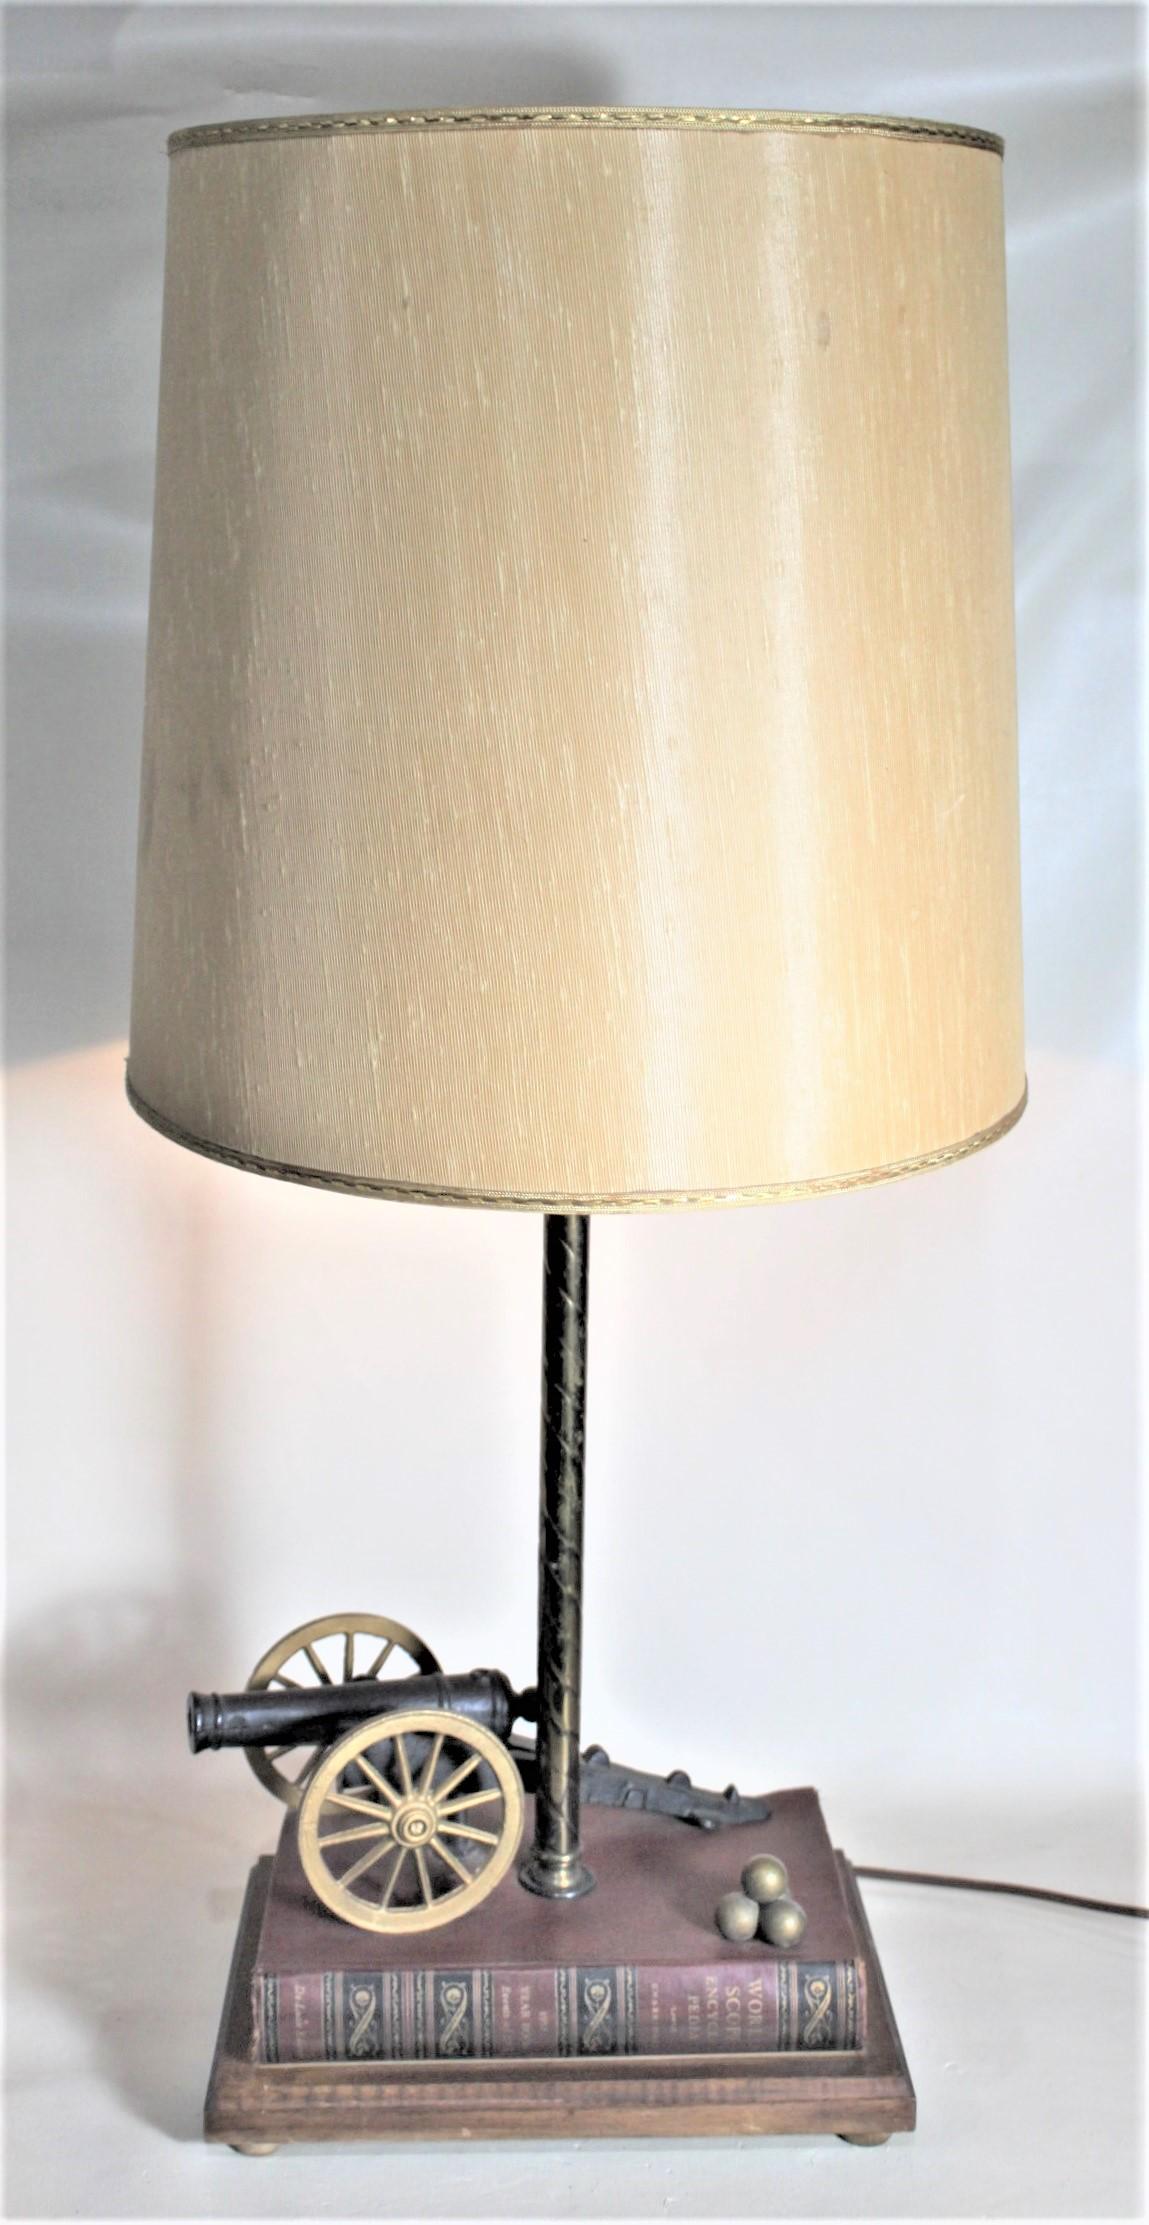 This very unique and functional table lamp is unsigned, but presumed to have been homemade in Canada in approximately 1965 in the period midcentury style. The lamp features a figural cast iron canon and leather bound book with cast canon balls